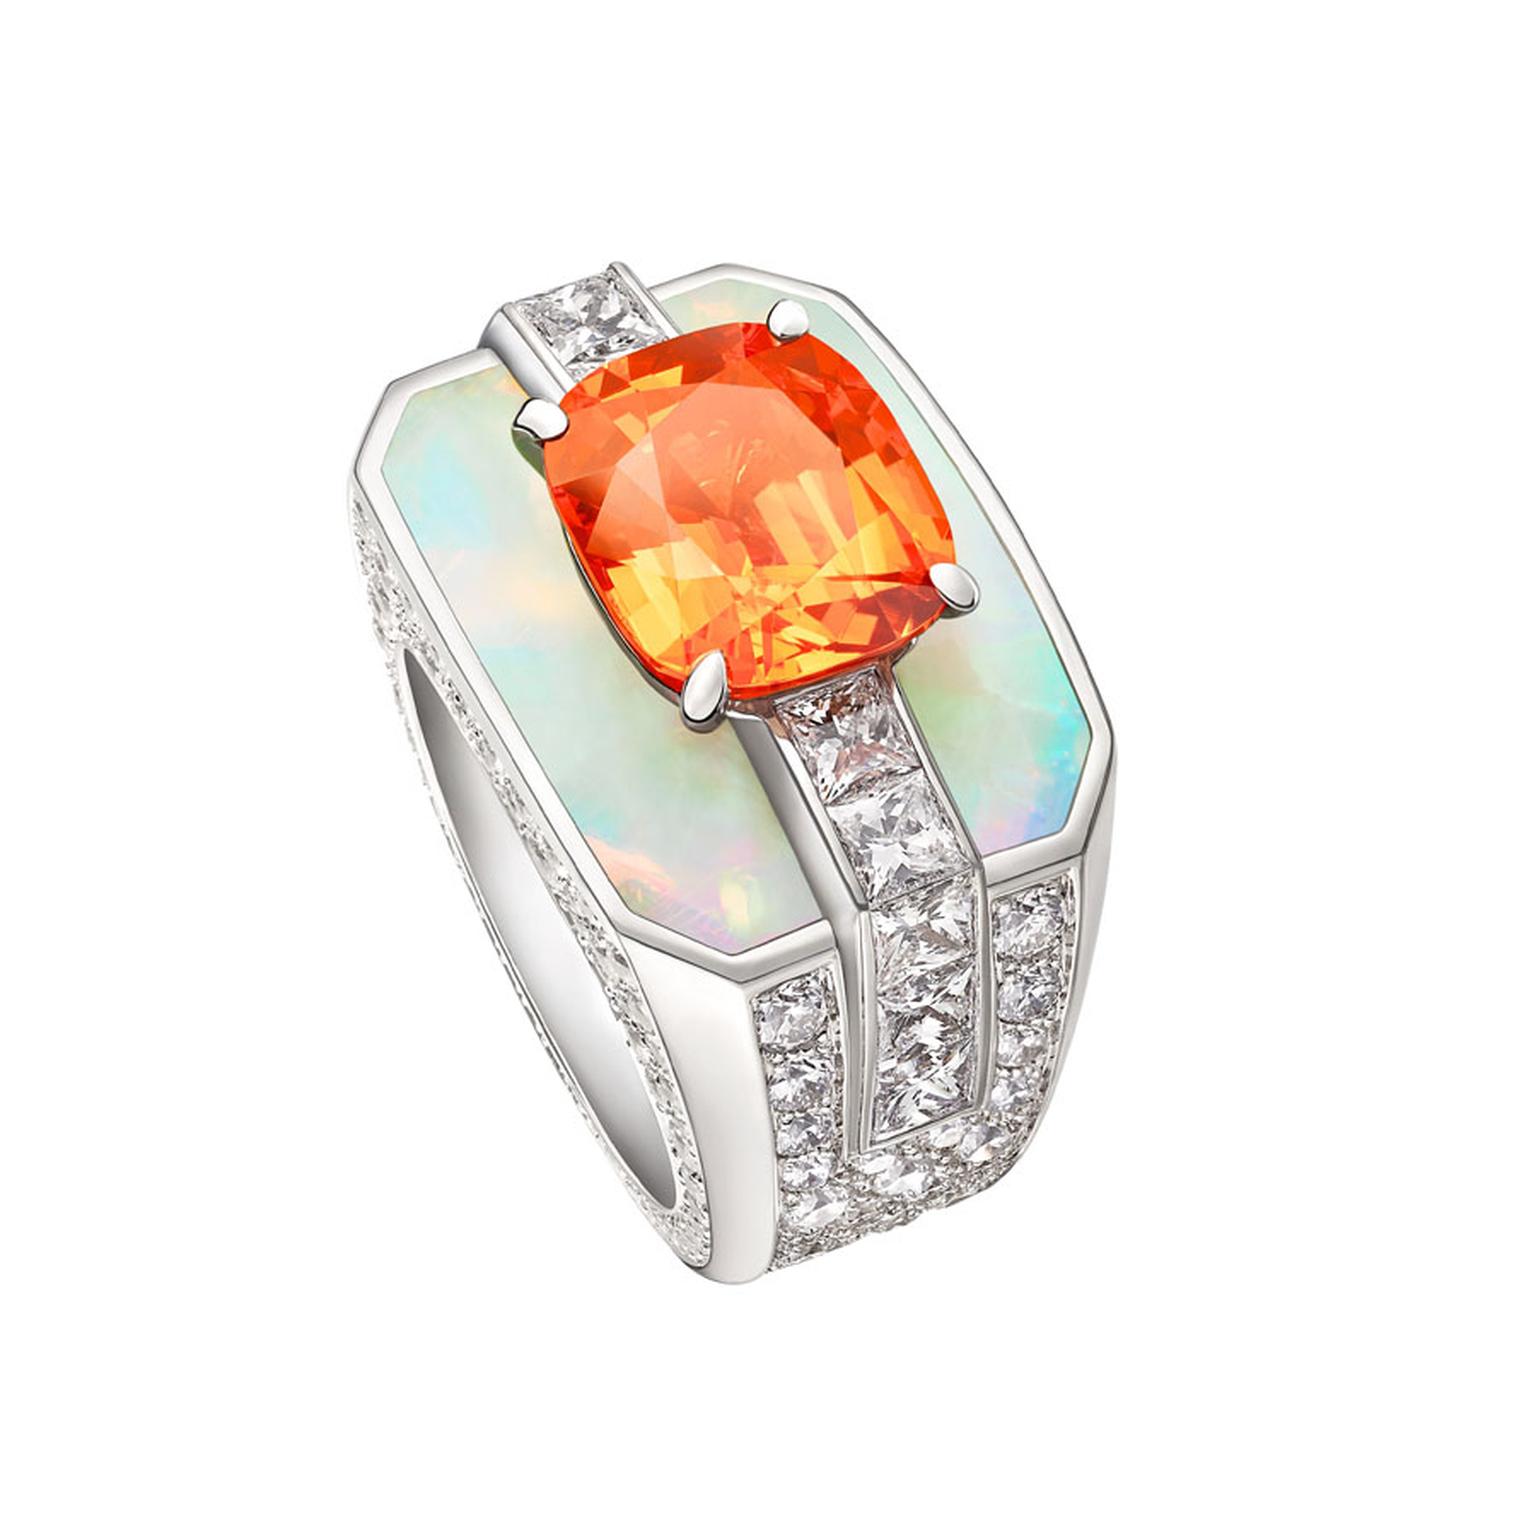 Louis Vuitton white gold ring, set with a mandarin garnet, opals and diamonds, from the Chain Attraction collection